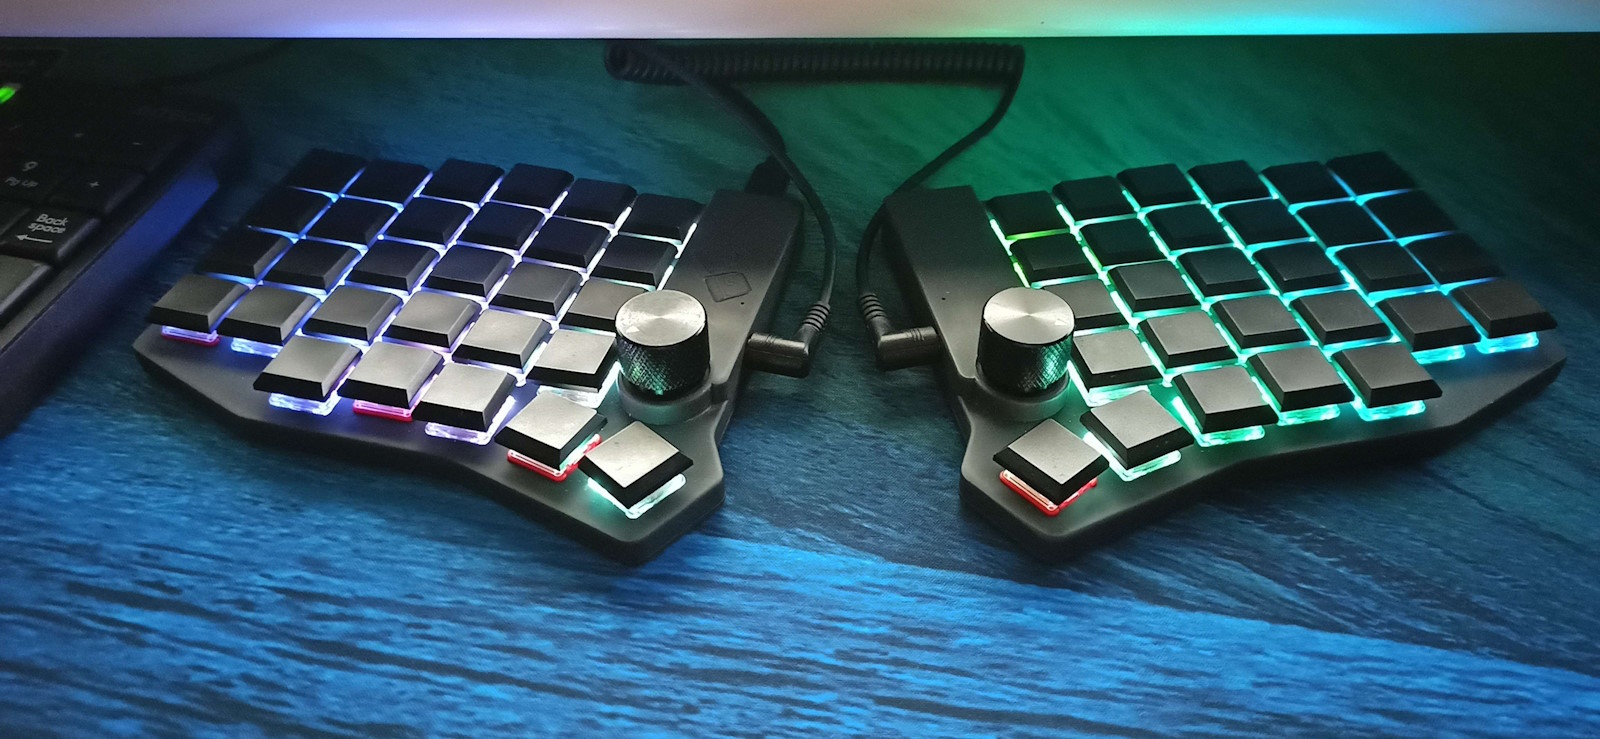 A Sofle Choc keyboard illuminates a matching desk mat in quiet green and blue tones. Some of the keys have different base colors.